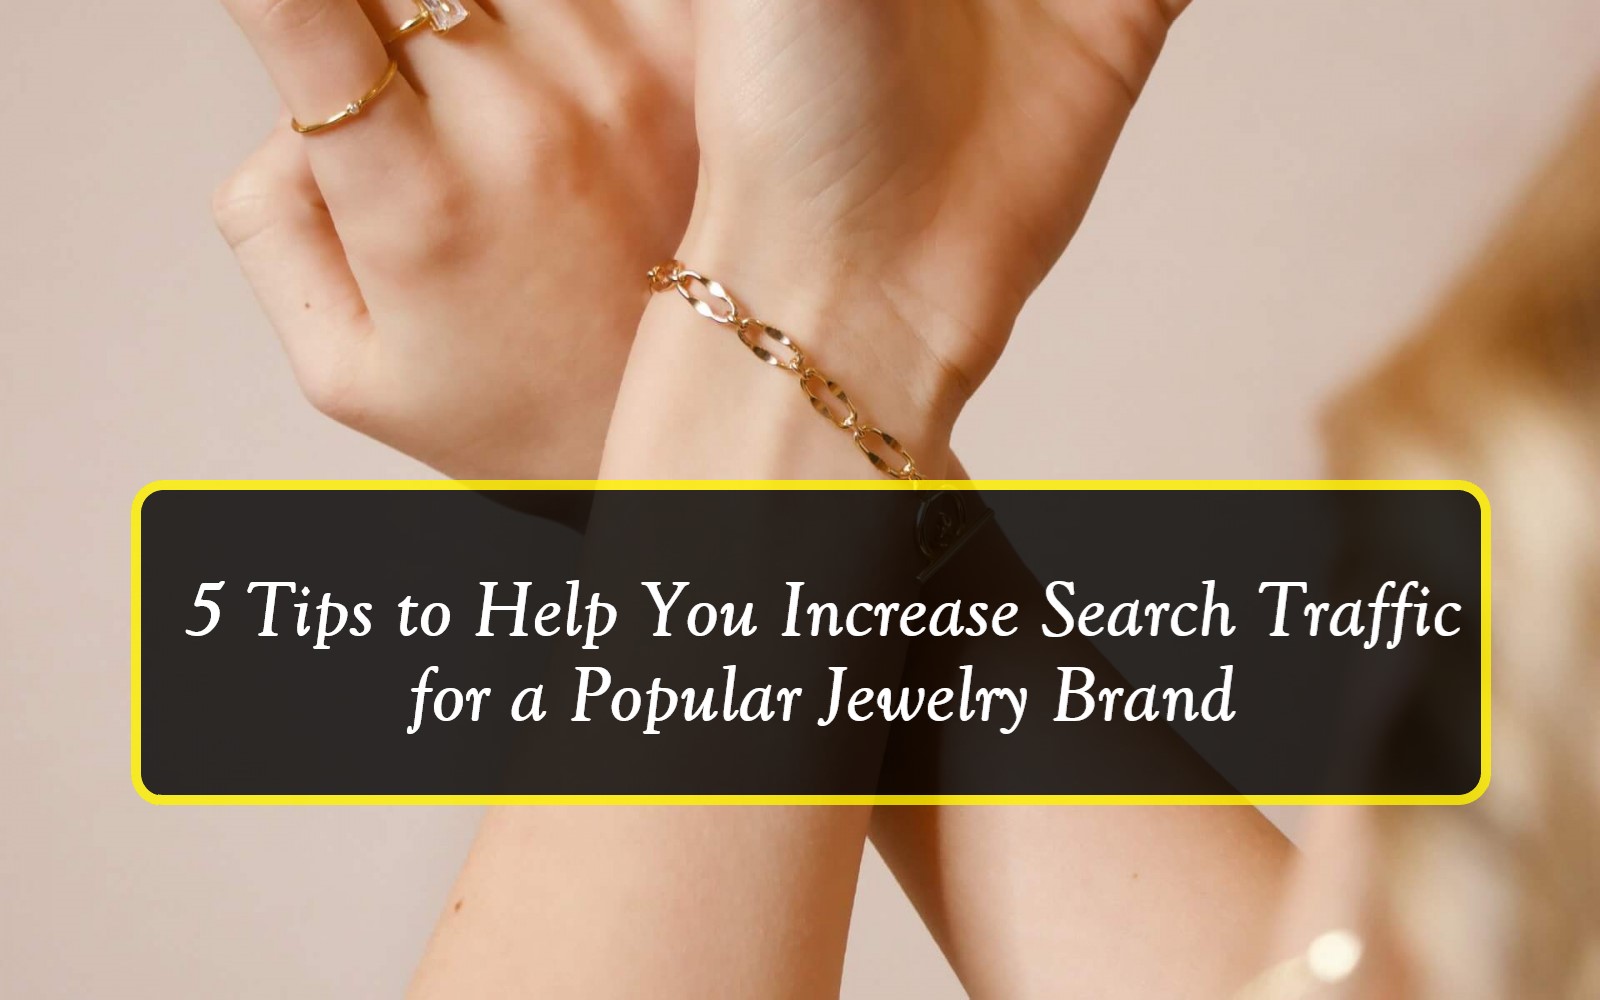 5 Tips to Help You Increase Search Traffic for a Popular Jewelry Brand